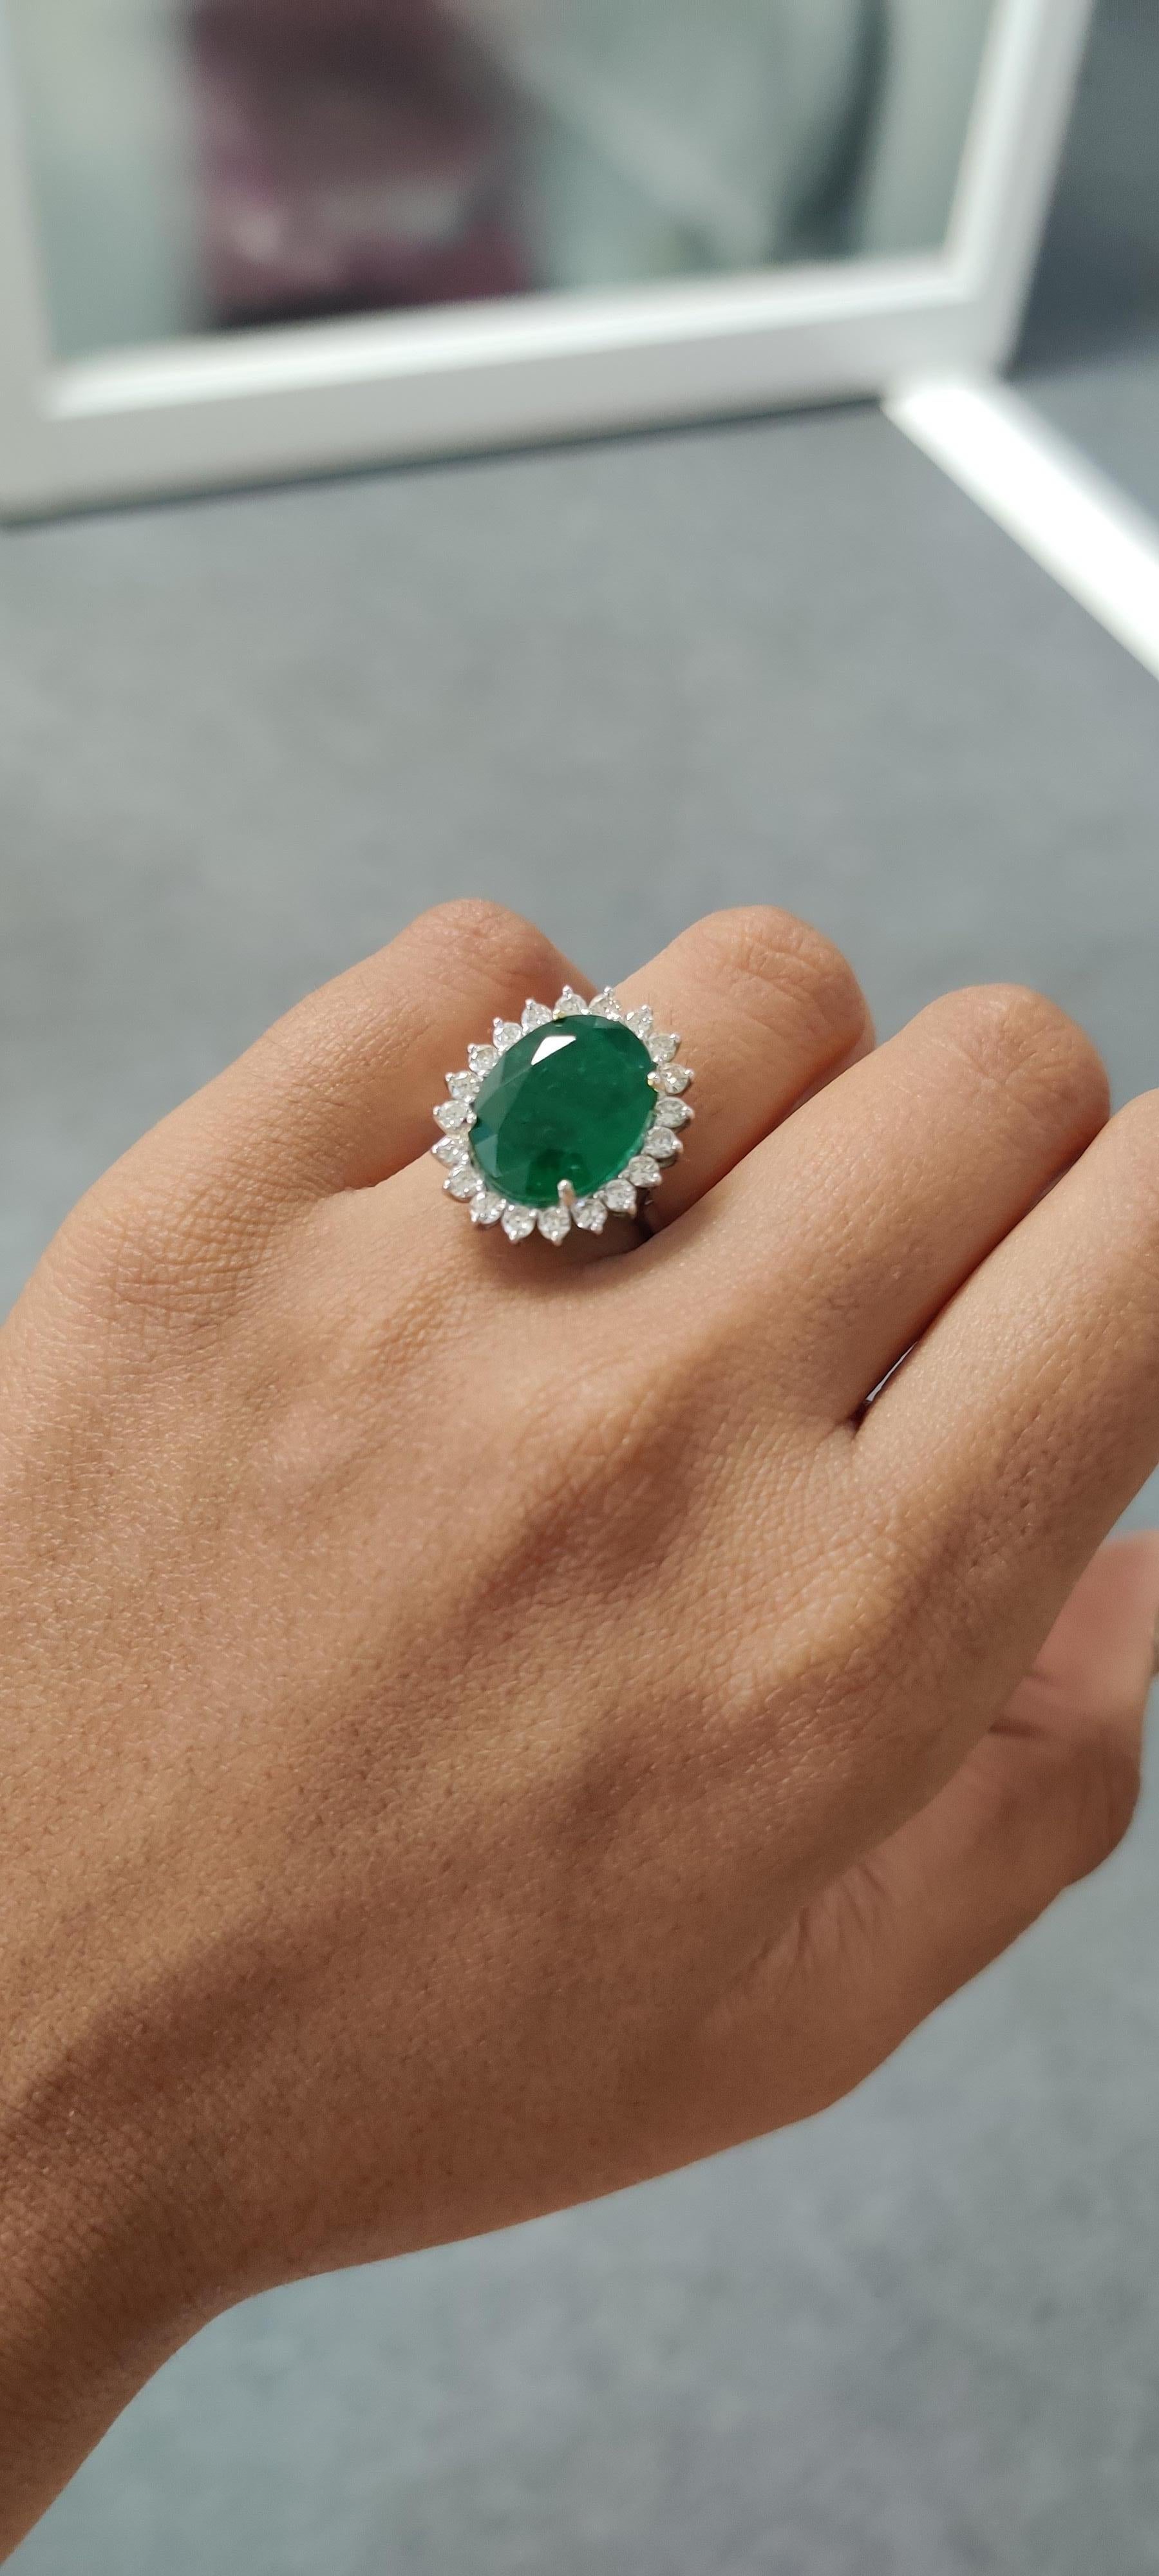 Christmas Special 7.11 Carat Zambian Emerald Ring with Old Cut Diamonds 2